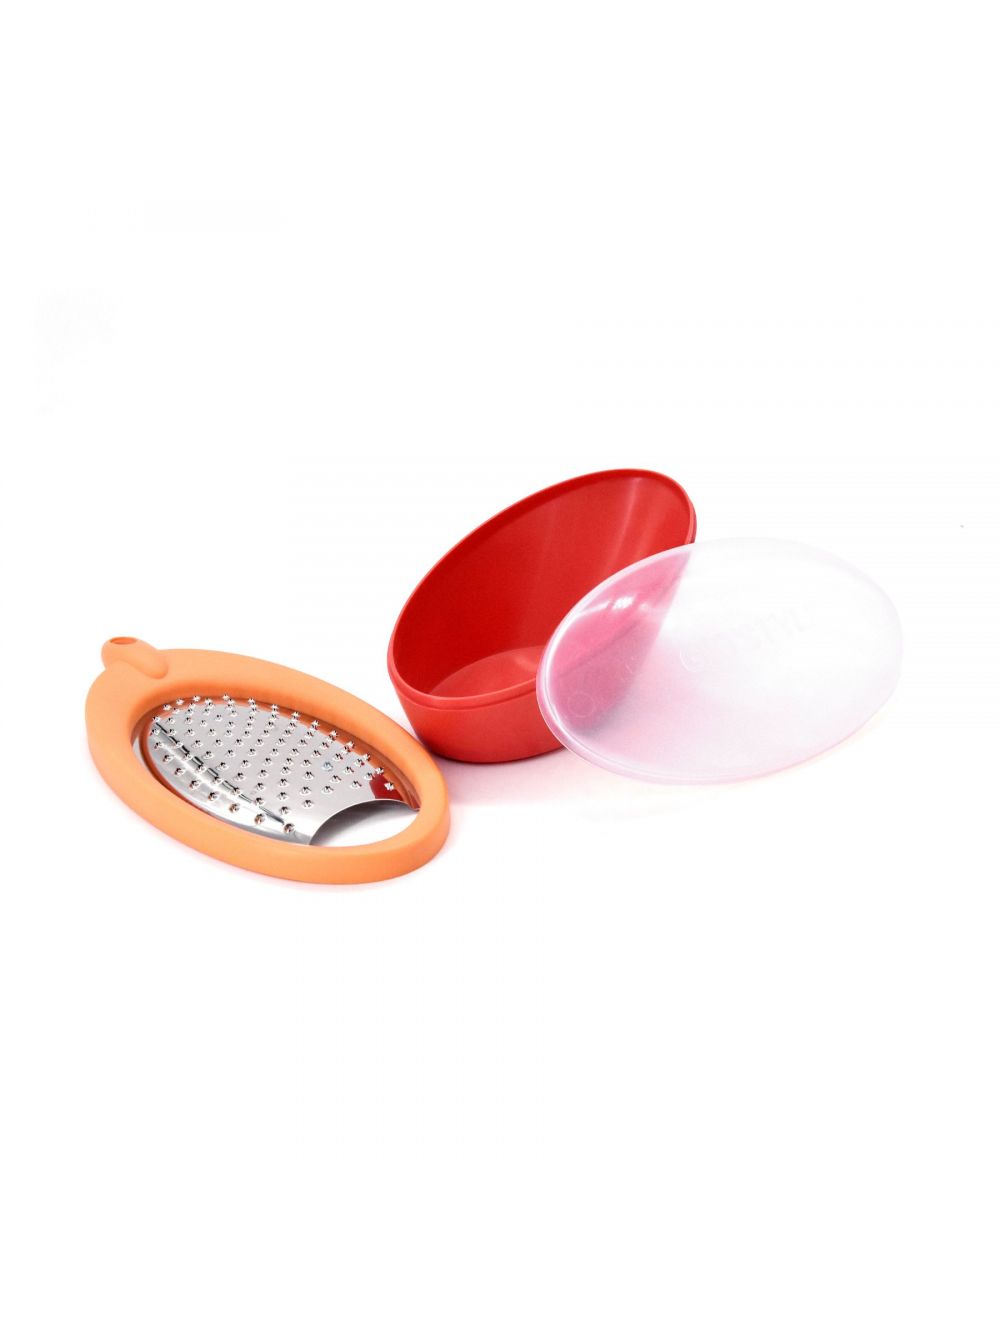 Giostyle Cheese Grater Red